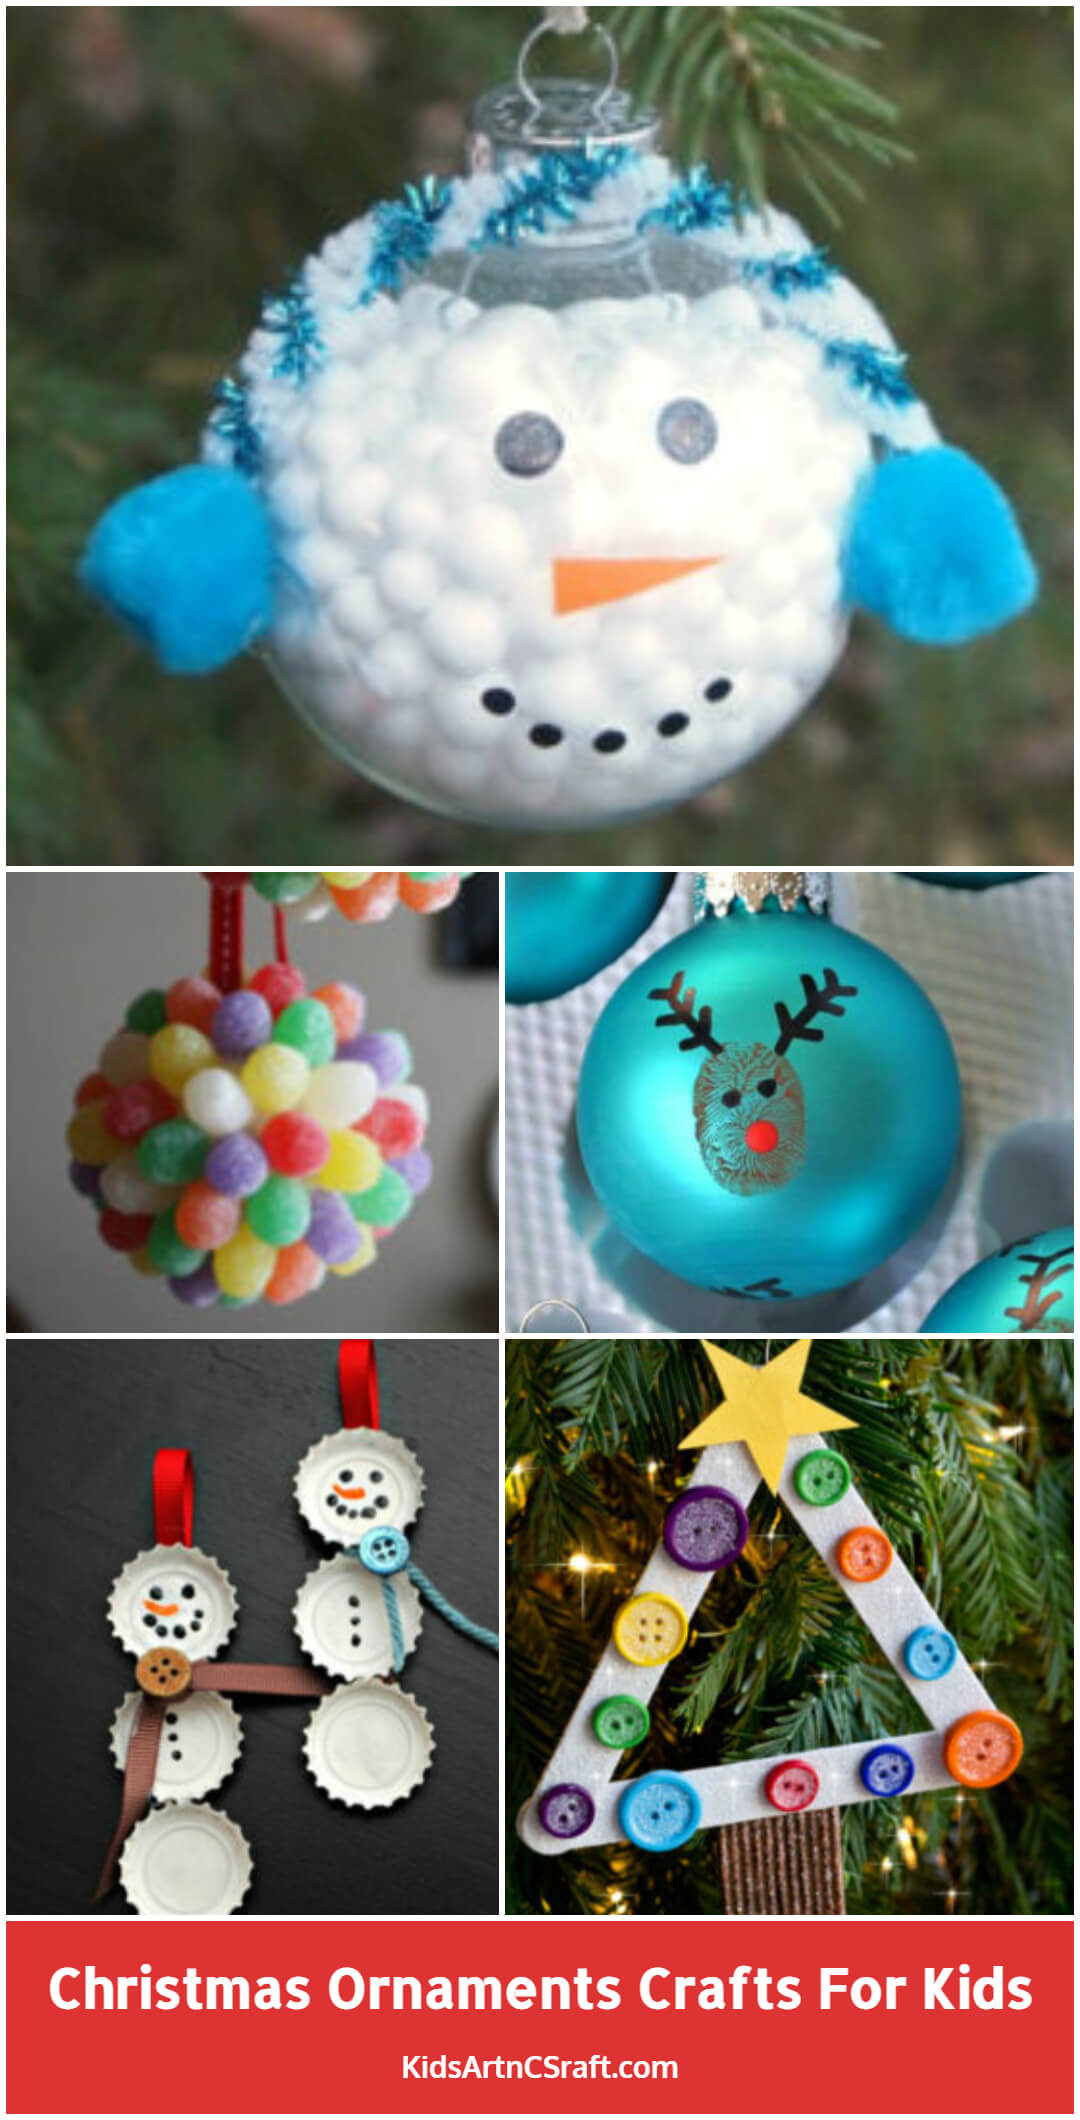 24 Easy Christmas Ornaments Crafts for Children